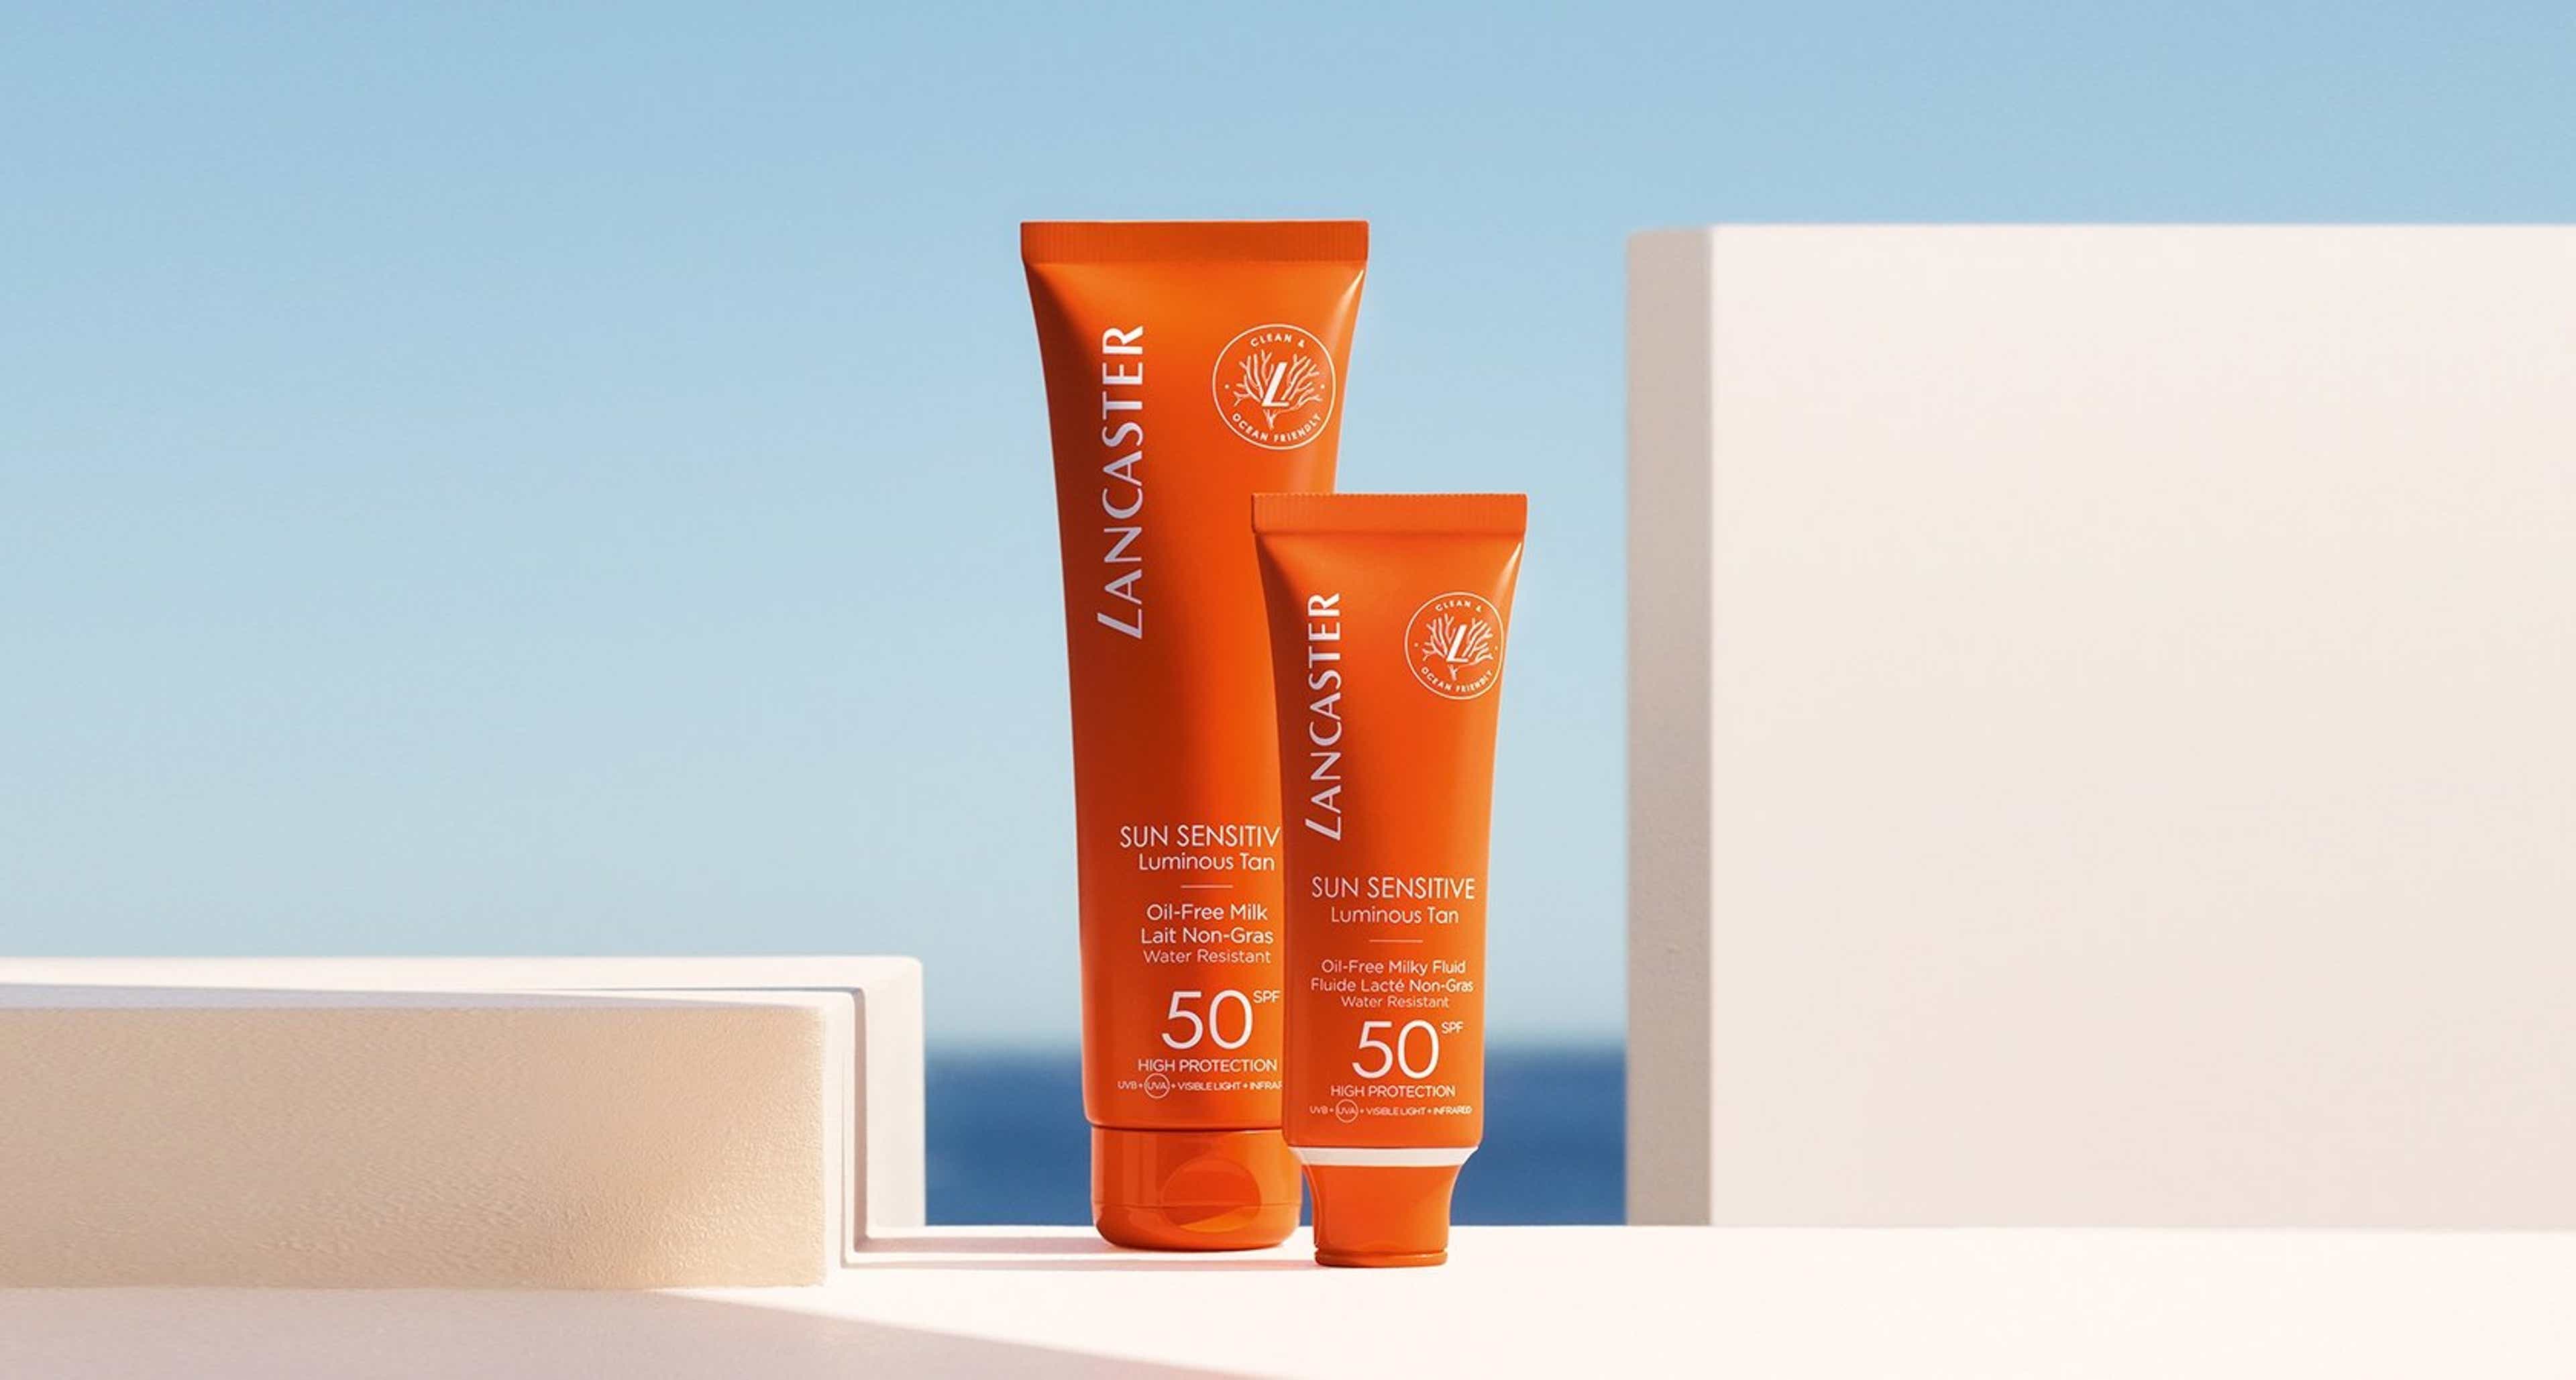 Coty lands industry first with sustainability certificate for Lancaster sun care products